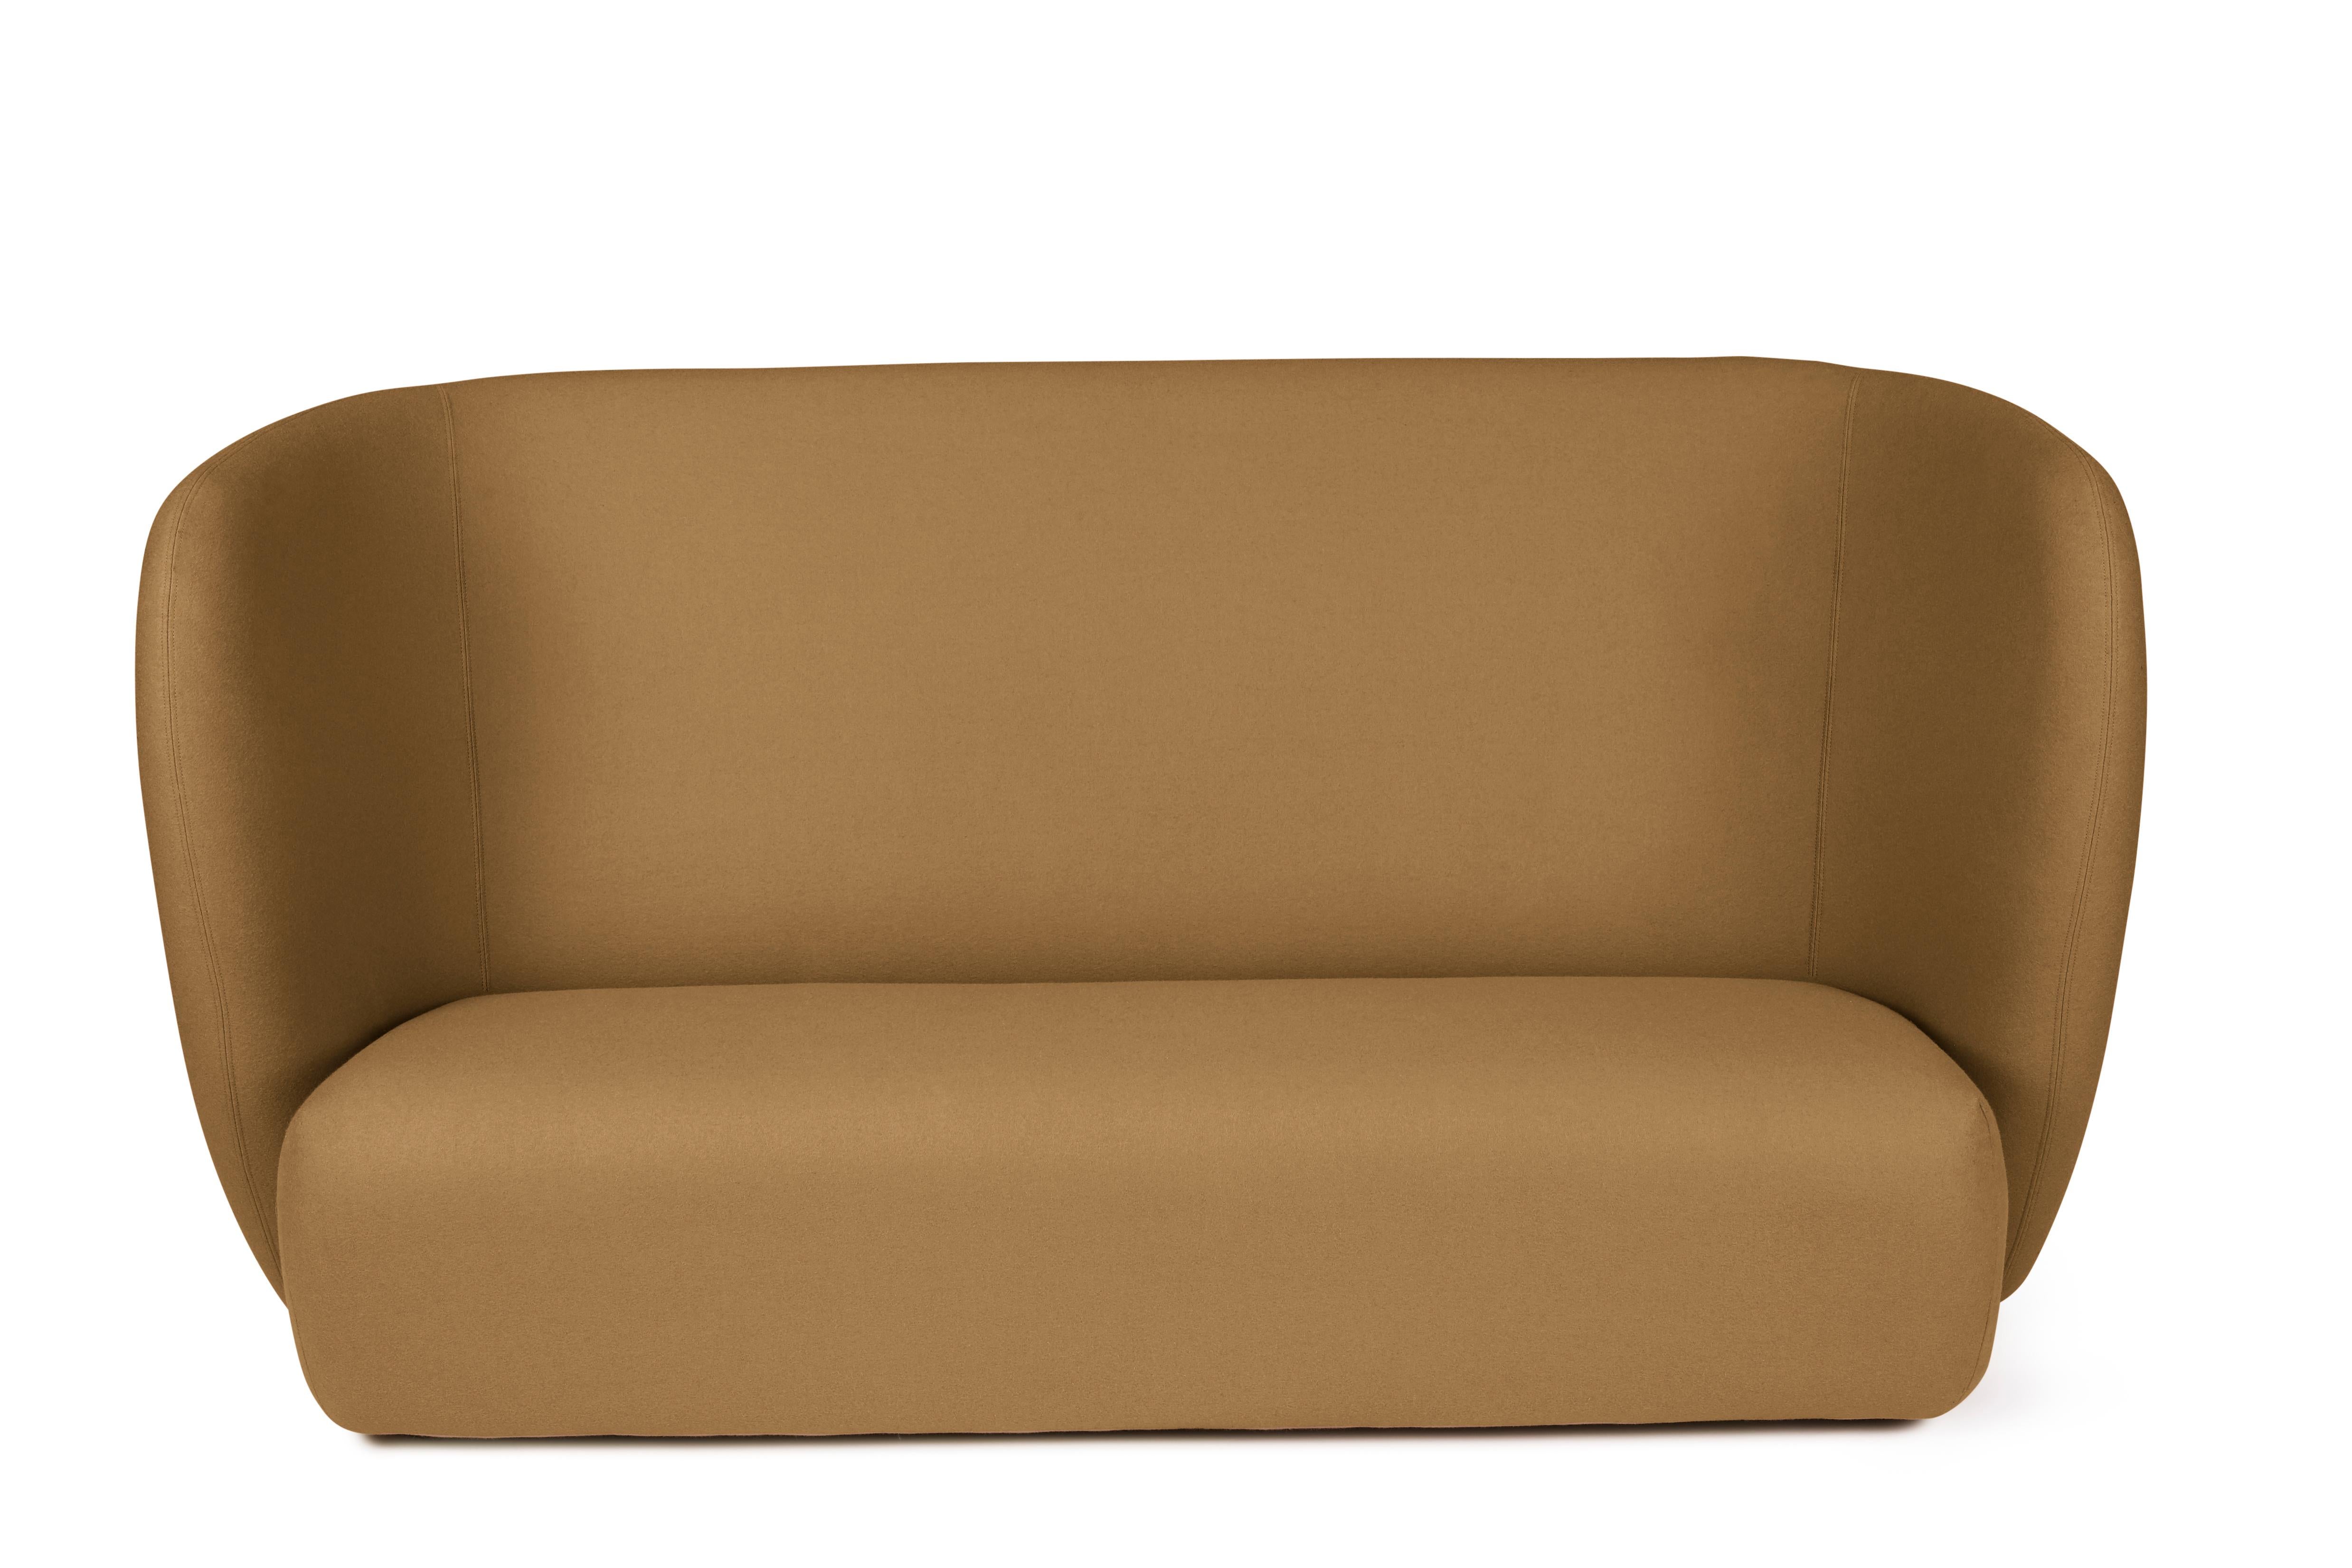 For Sale: Green (Hero 981) Haven 3-Seat Sofa, by Charlotte Høncke from Warm Nordic